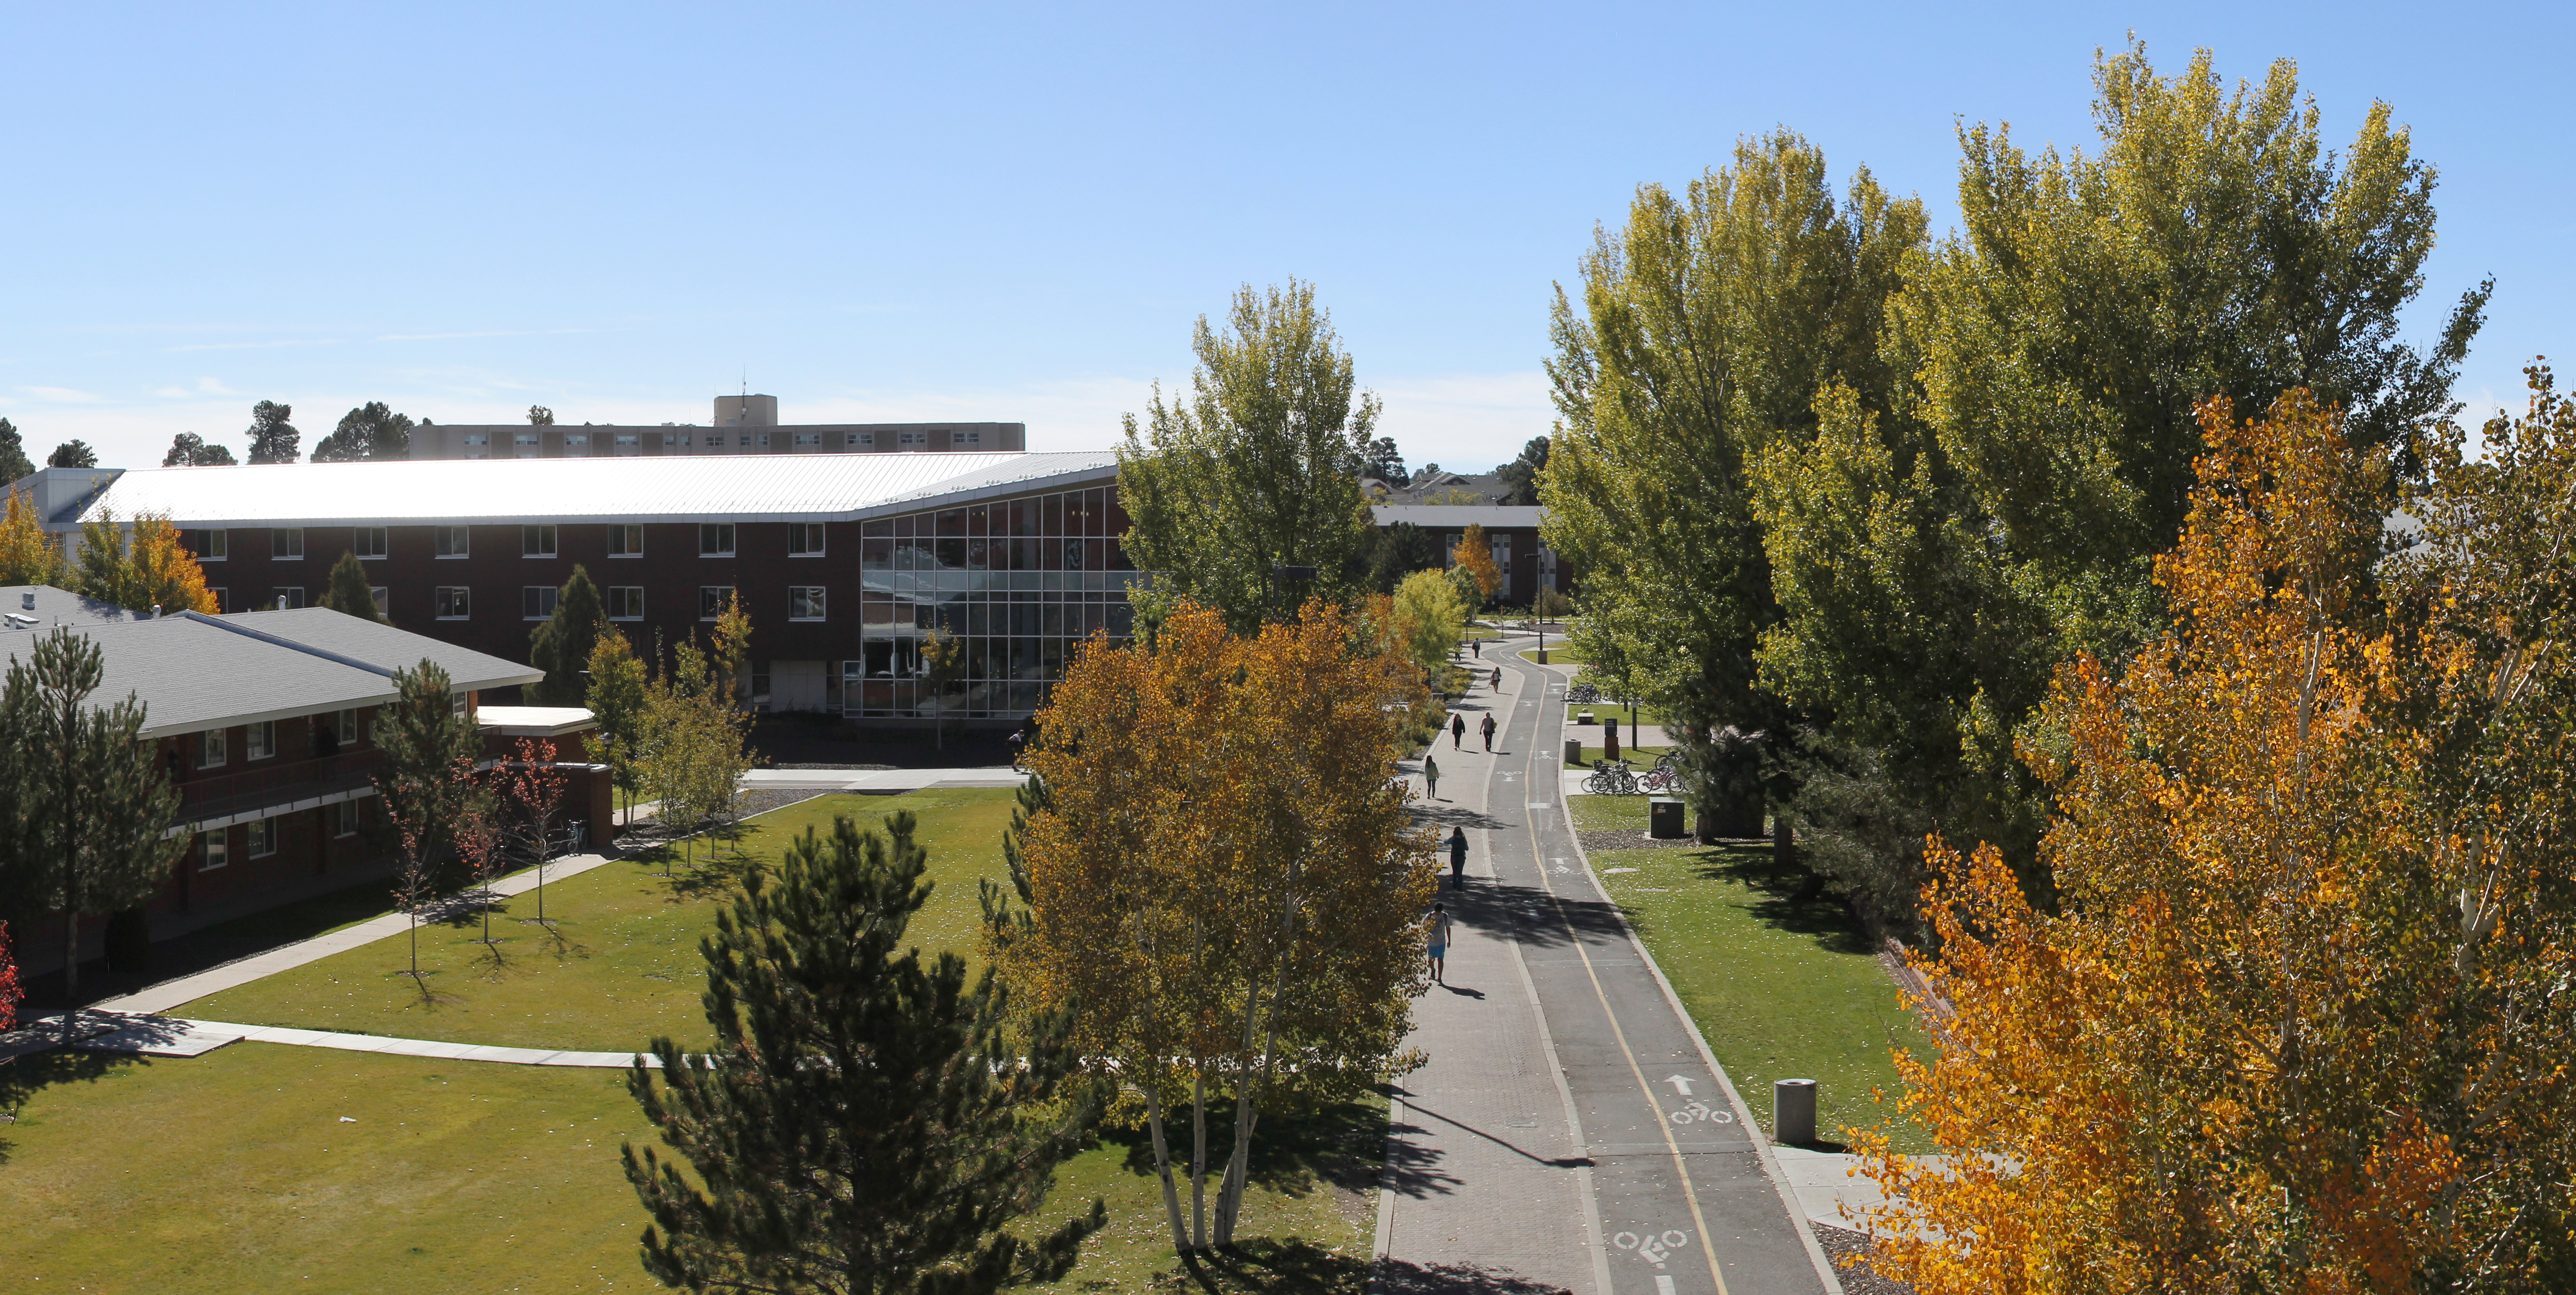 Flagstaff campus in the fall, with orange and green trees.